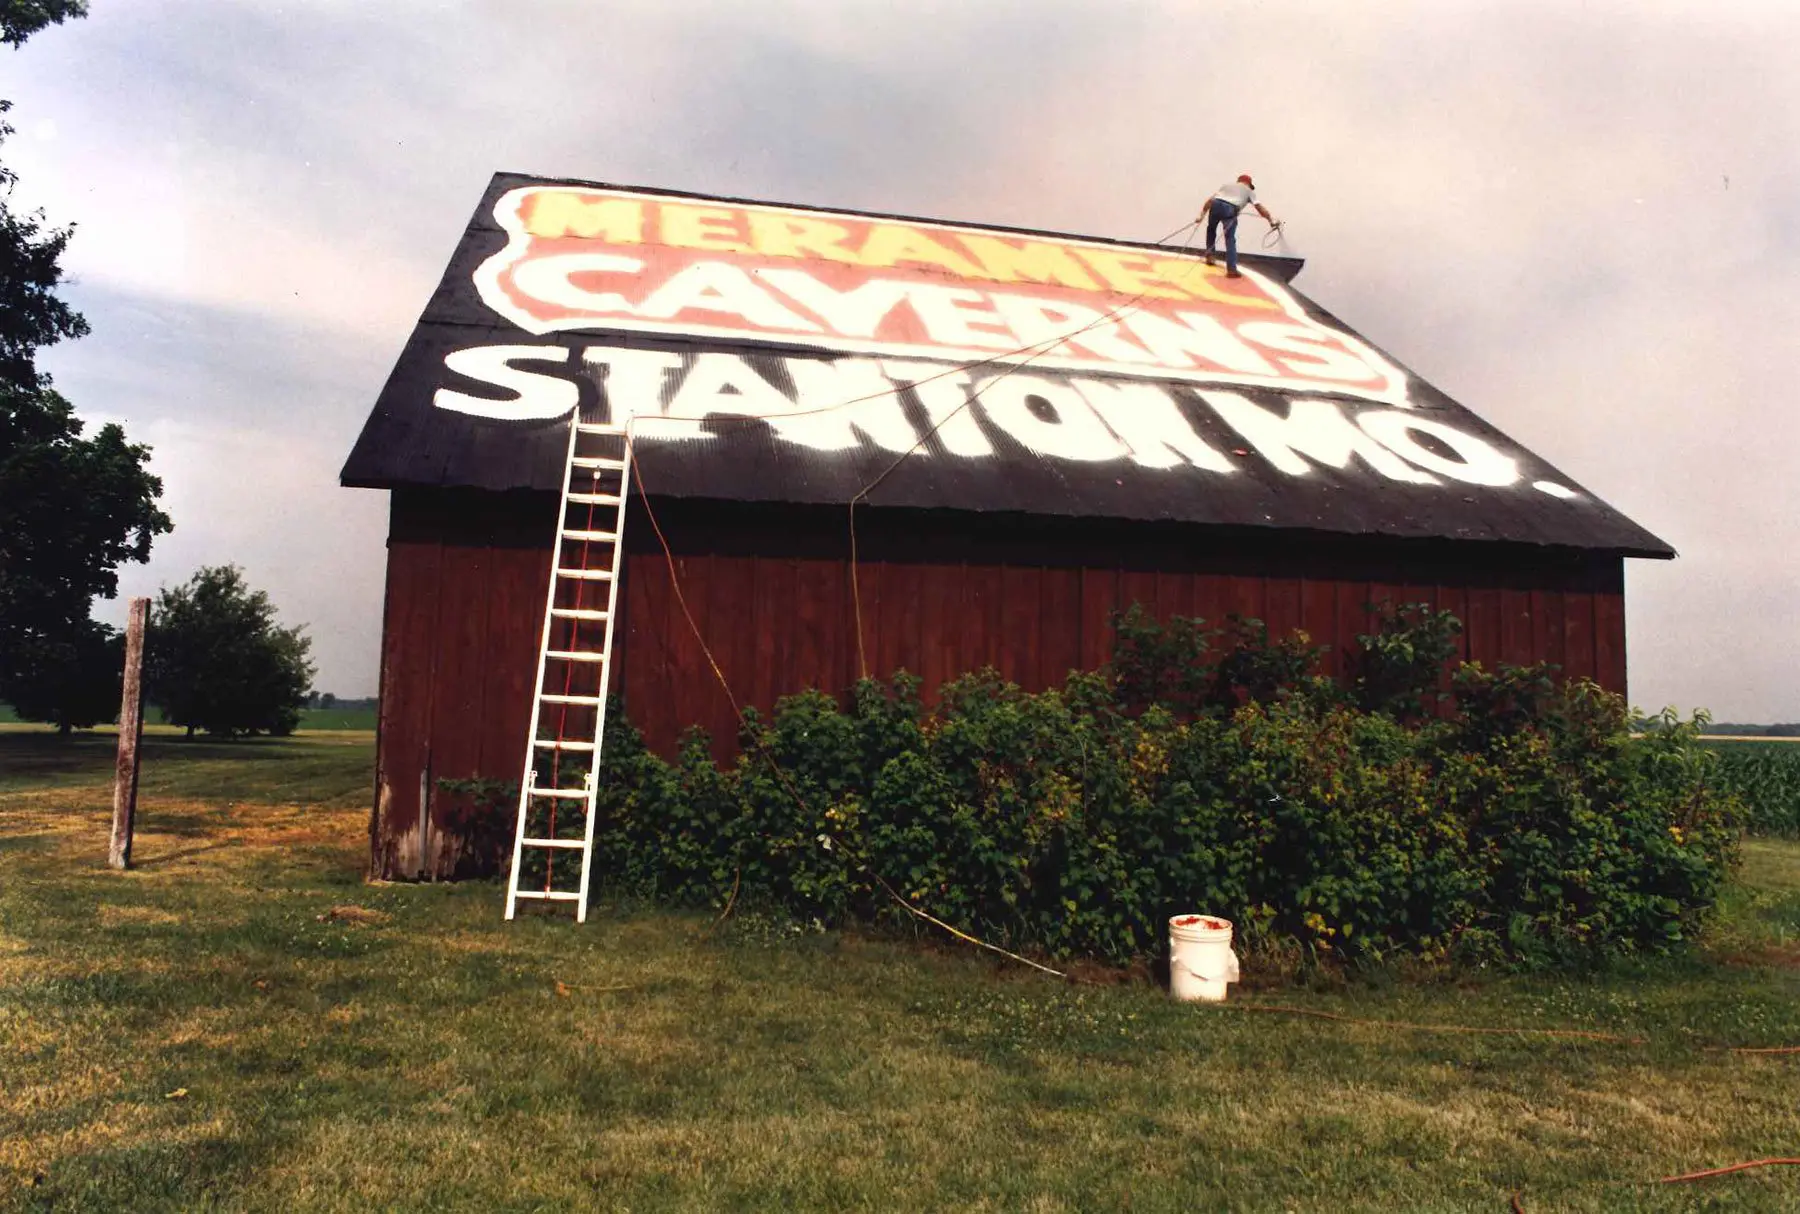 Advertisement for the Caverns were being painted on the roof of a barn